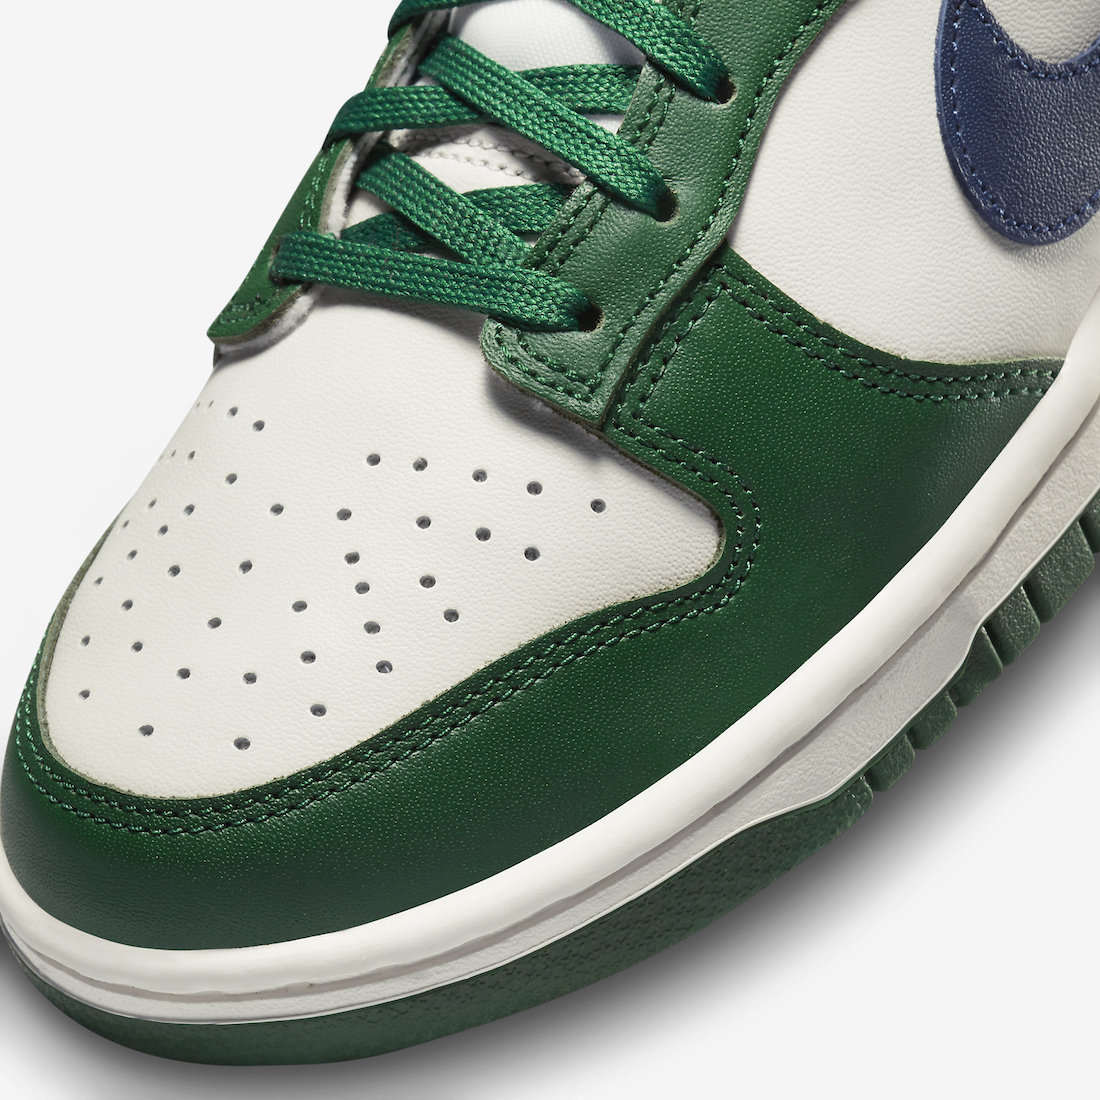 Nike Dunk Low Gorge Green DD1503-300 Release Date Price